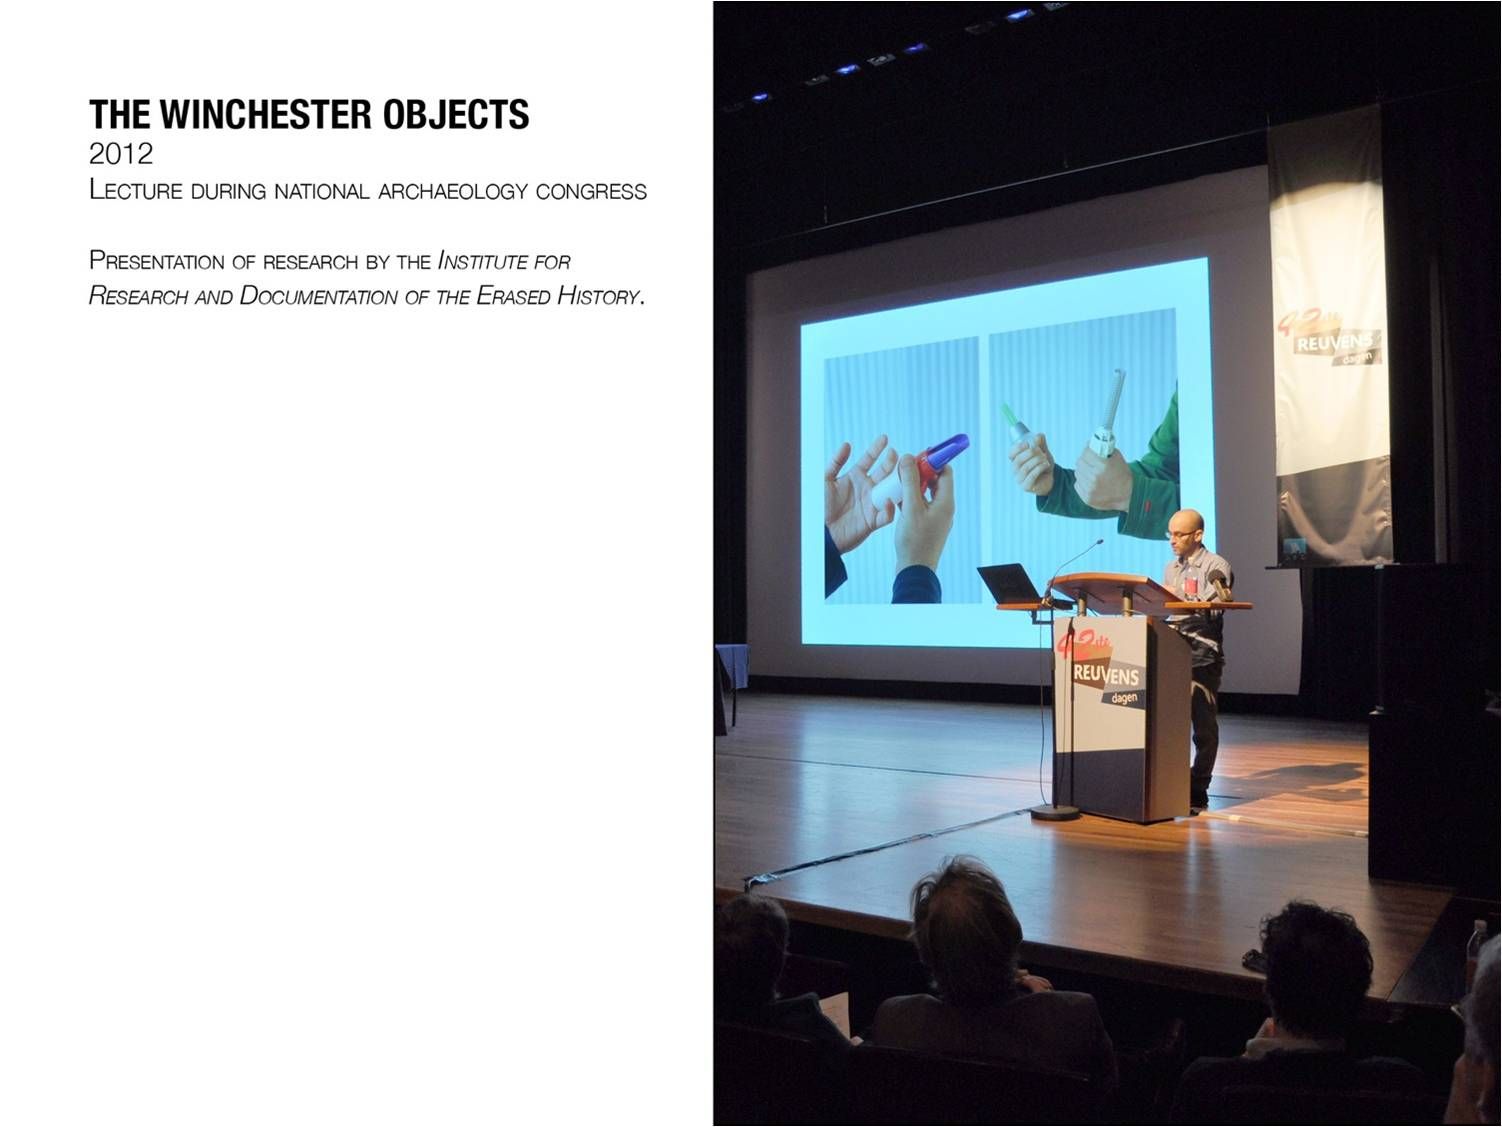 The winchester objects, 2012, Lecture during national archaelogy congress